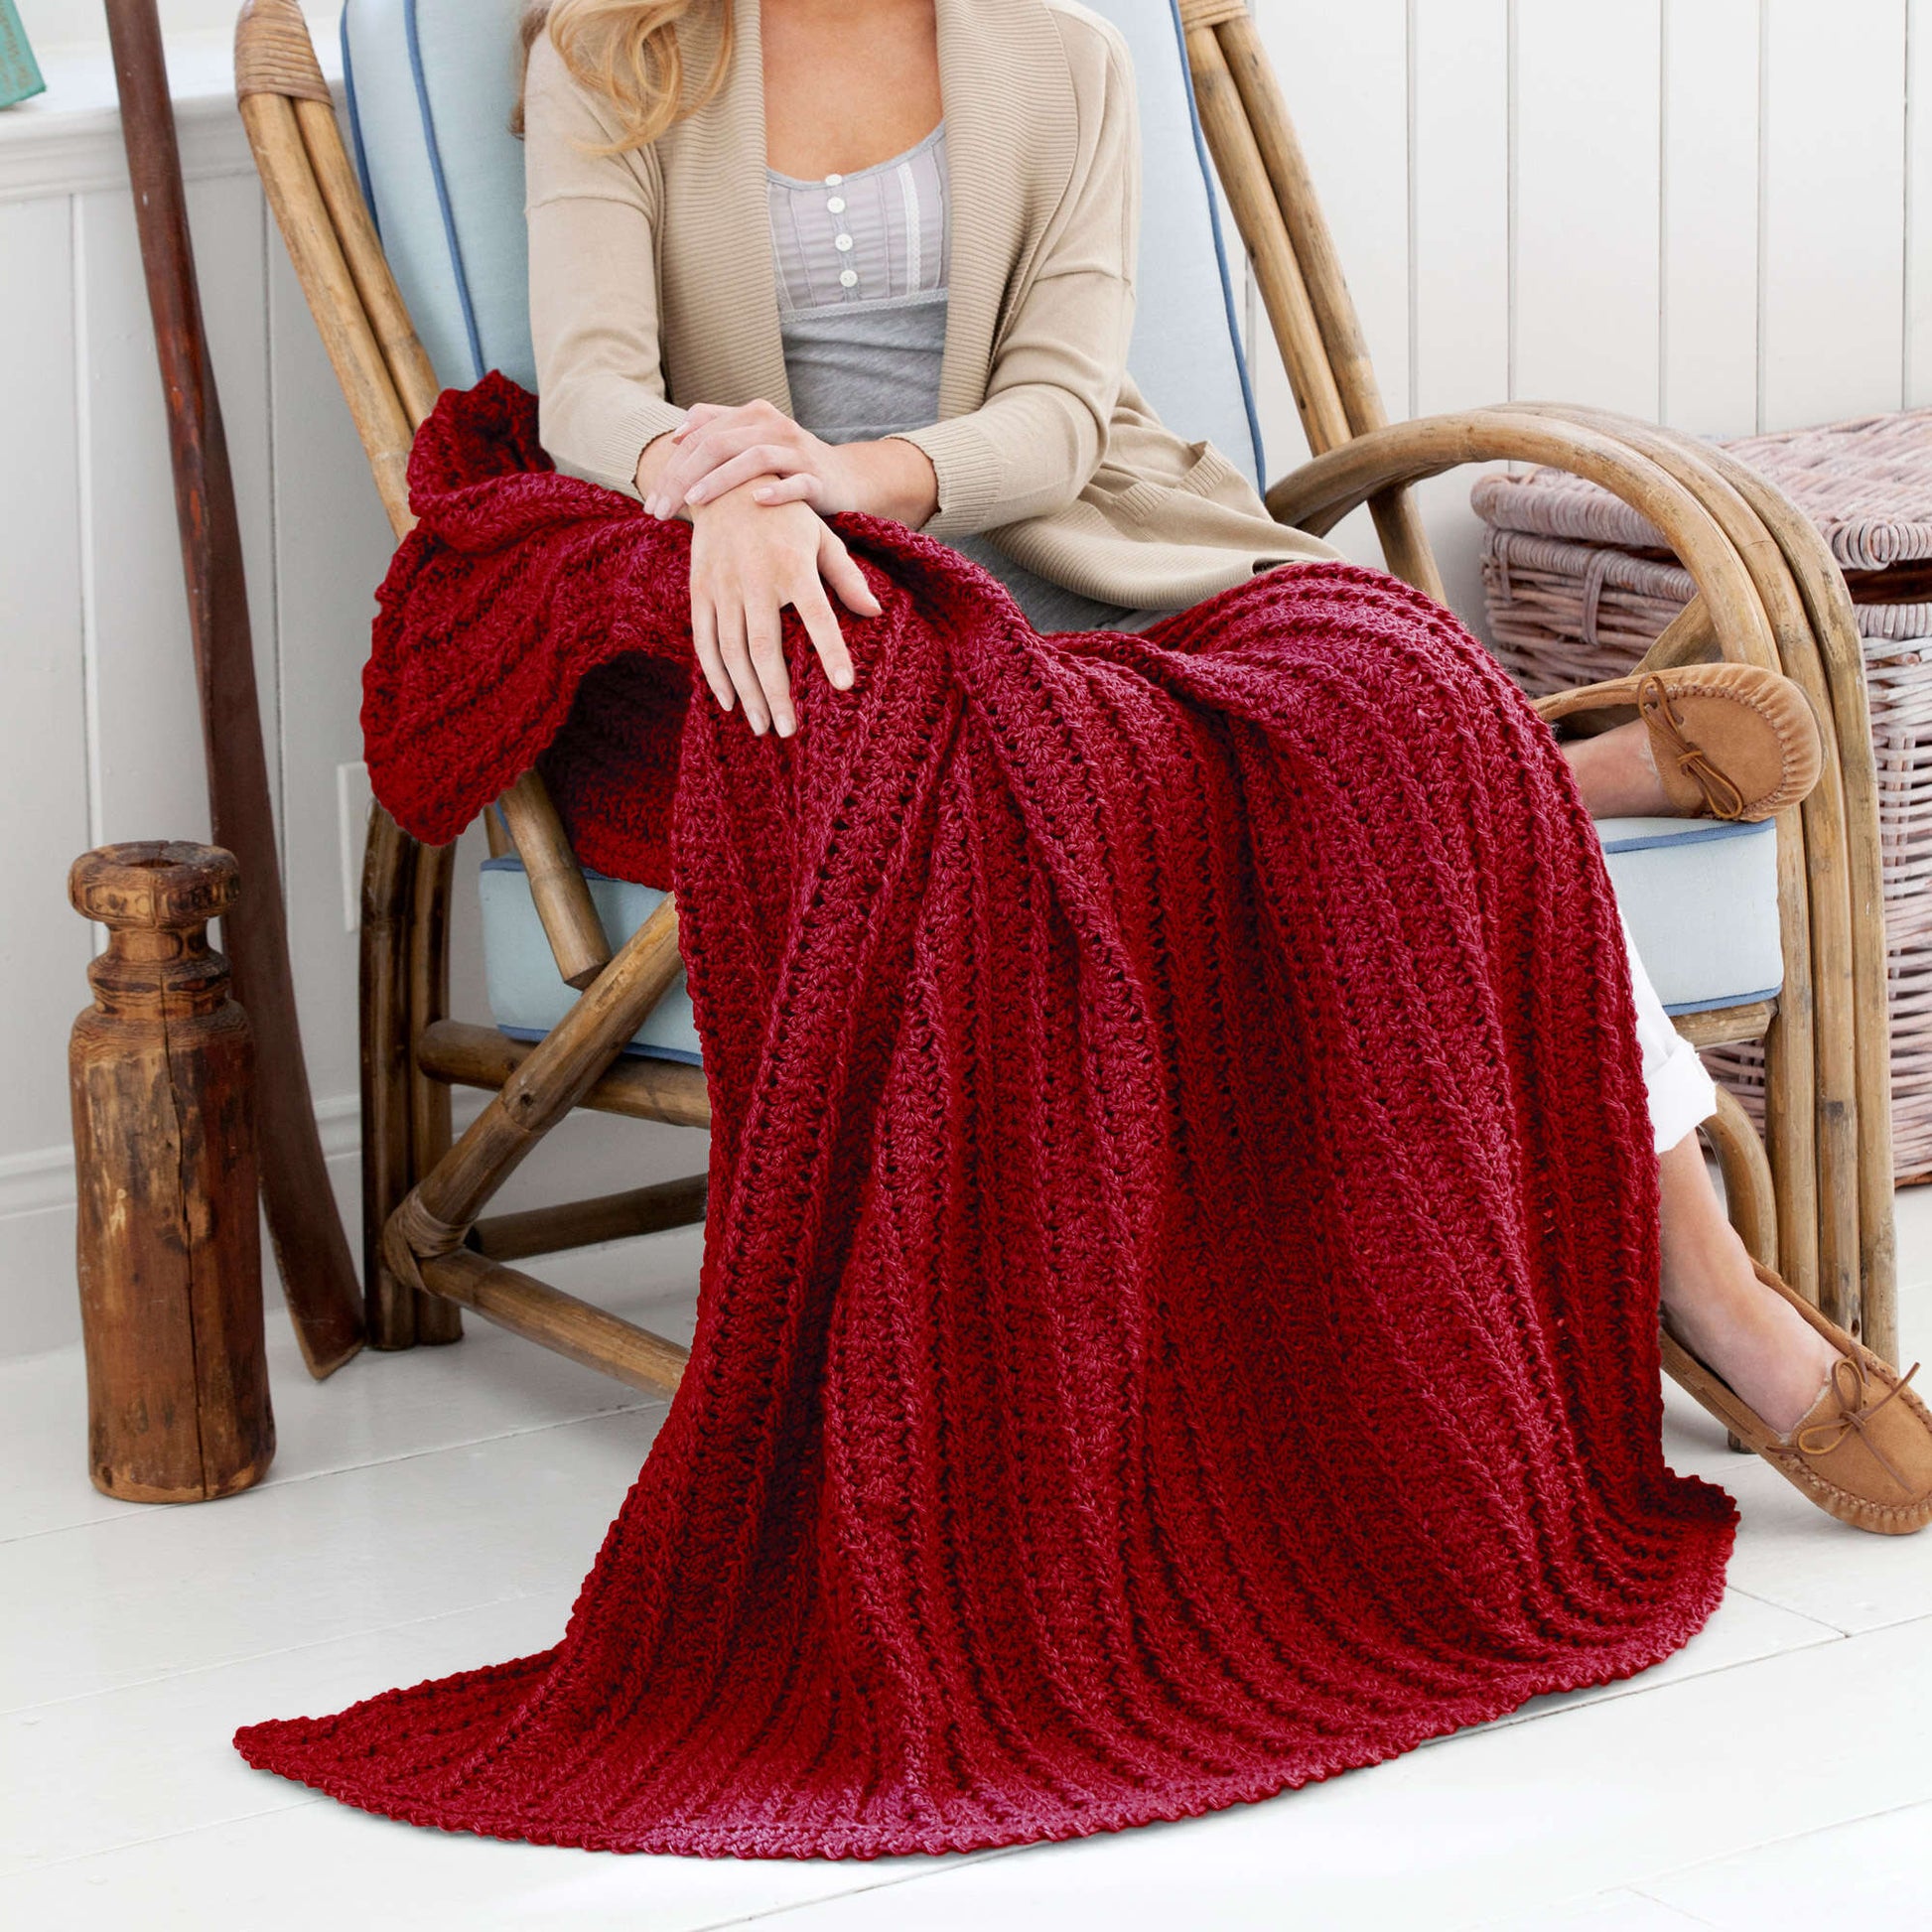 Free Red Heart Crochet Cabled And Shell Throw Pattern